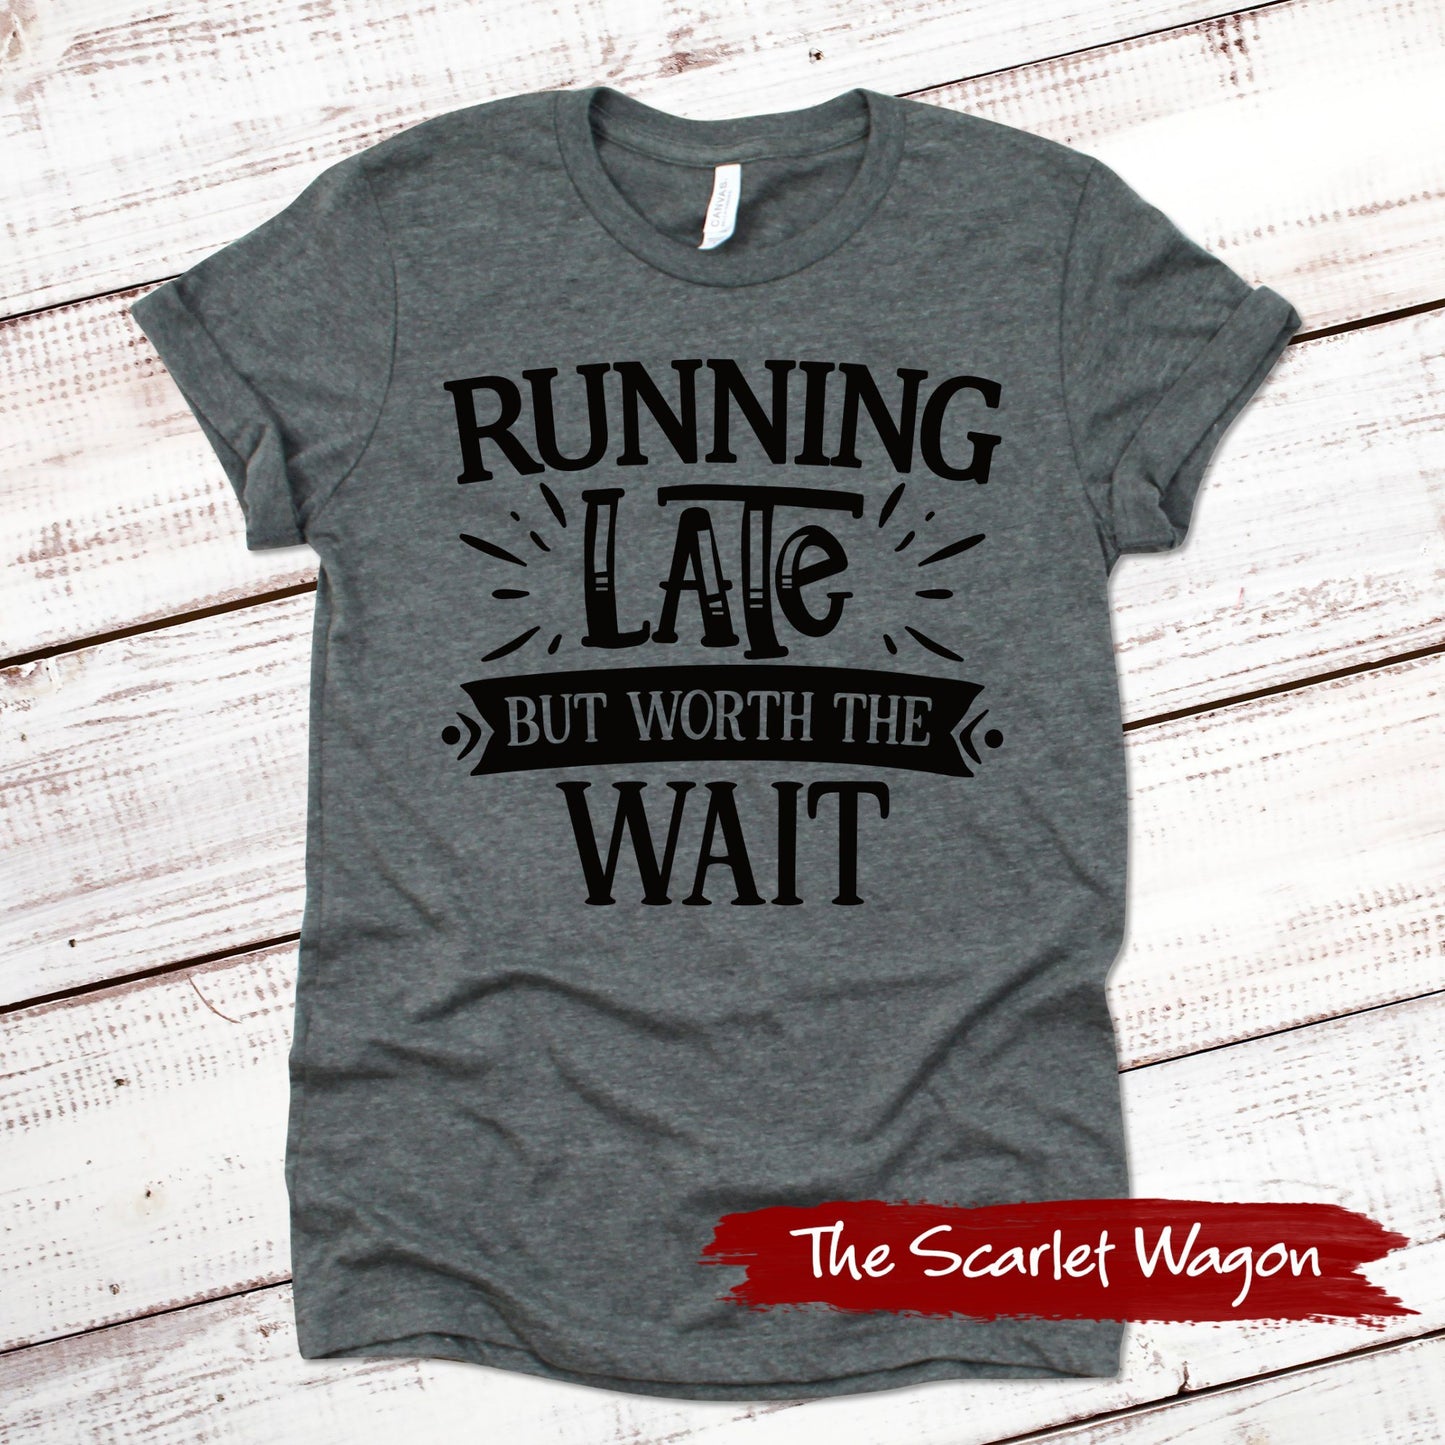 Running Late But Worth the Wait Funny Shirt Scarlet Wagon Deep Heather Gray XS 